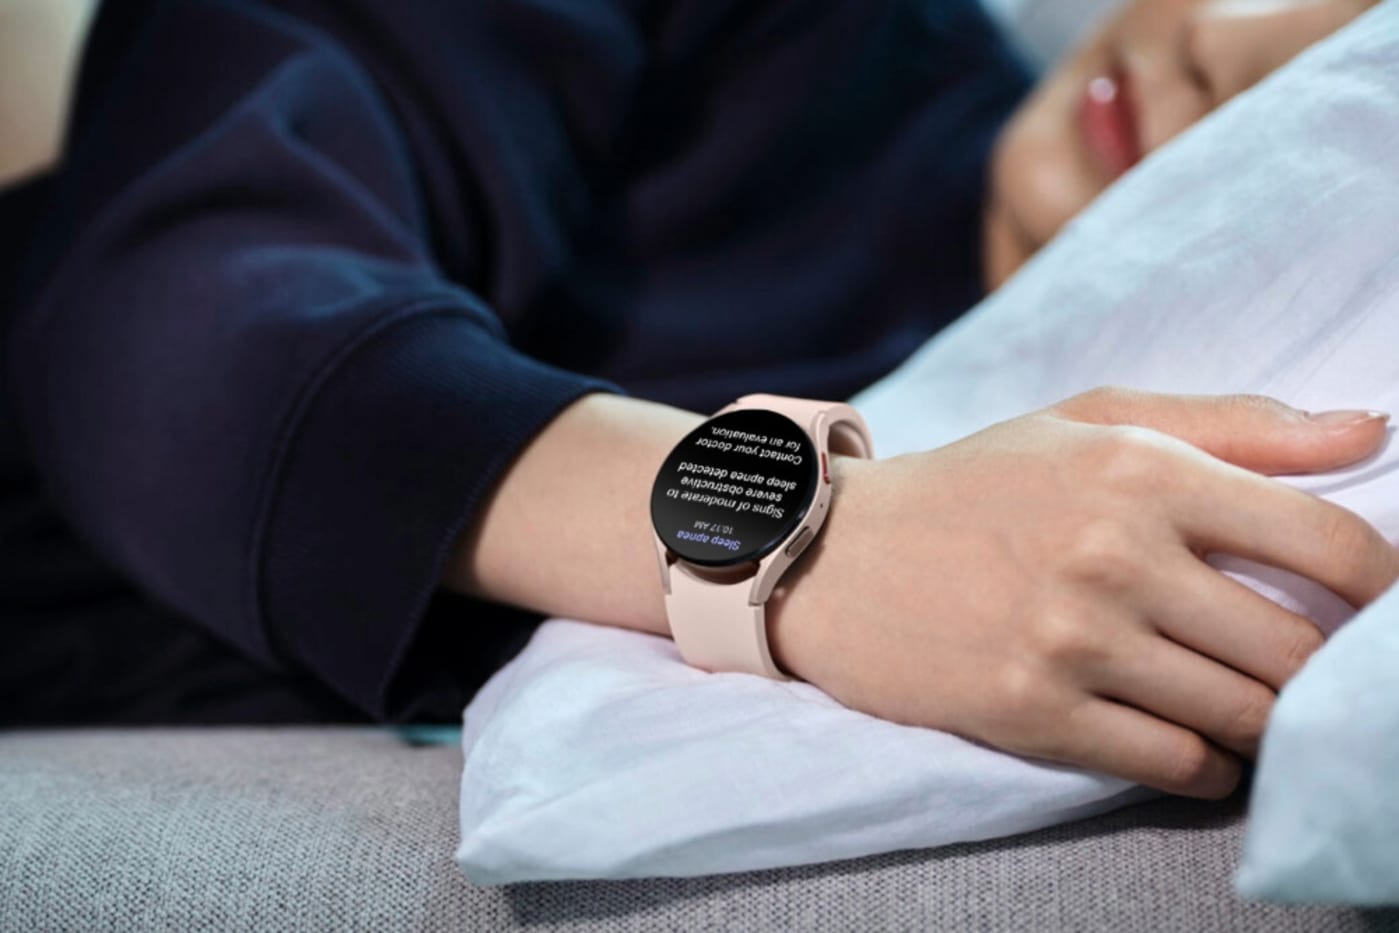 The Morning After: Samsung gets FDA approval for its sleep apnea feature on Galaxy Watch